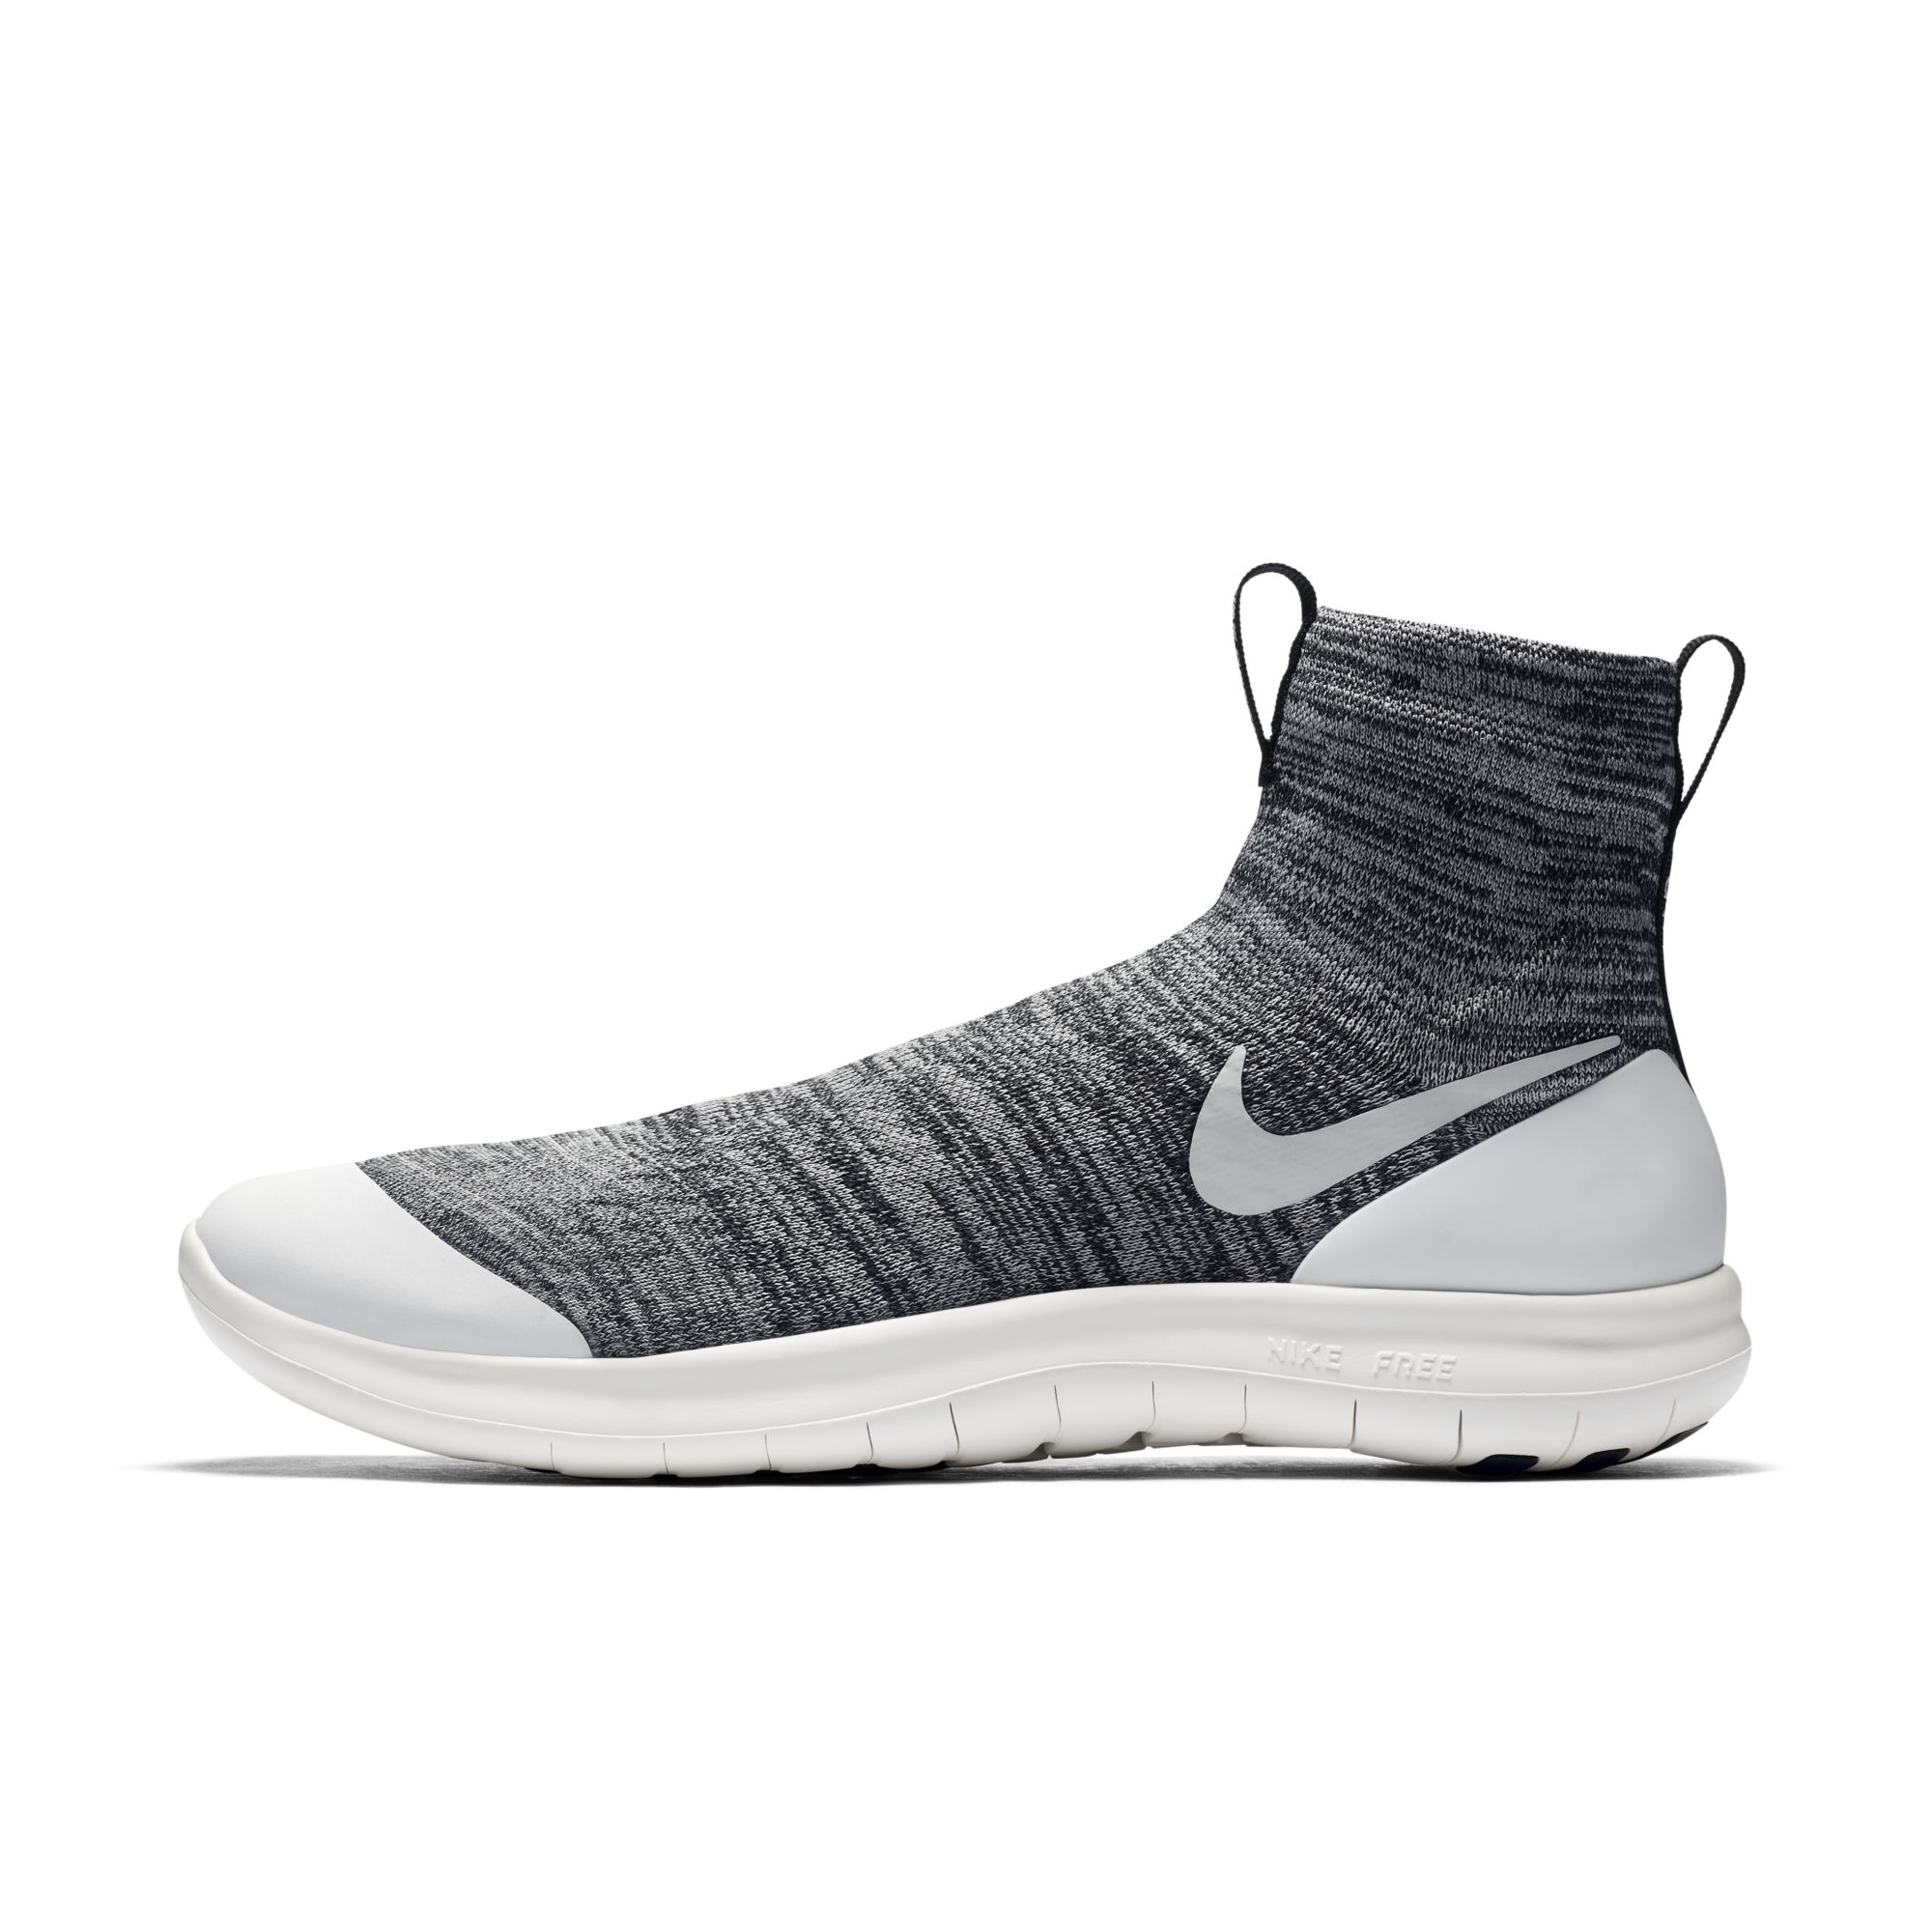 An Official Look at Veil Gyakusou, Nike's Latest Sock Runner -